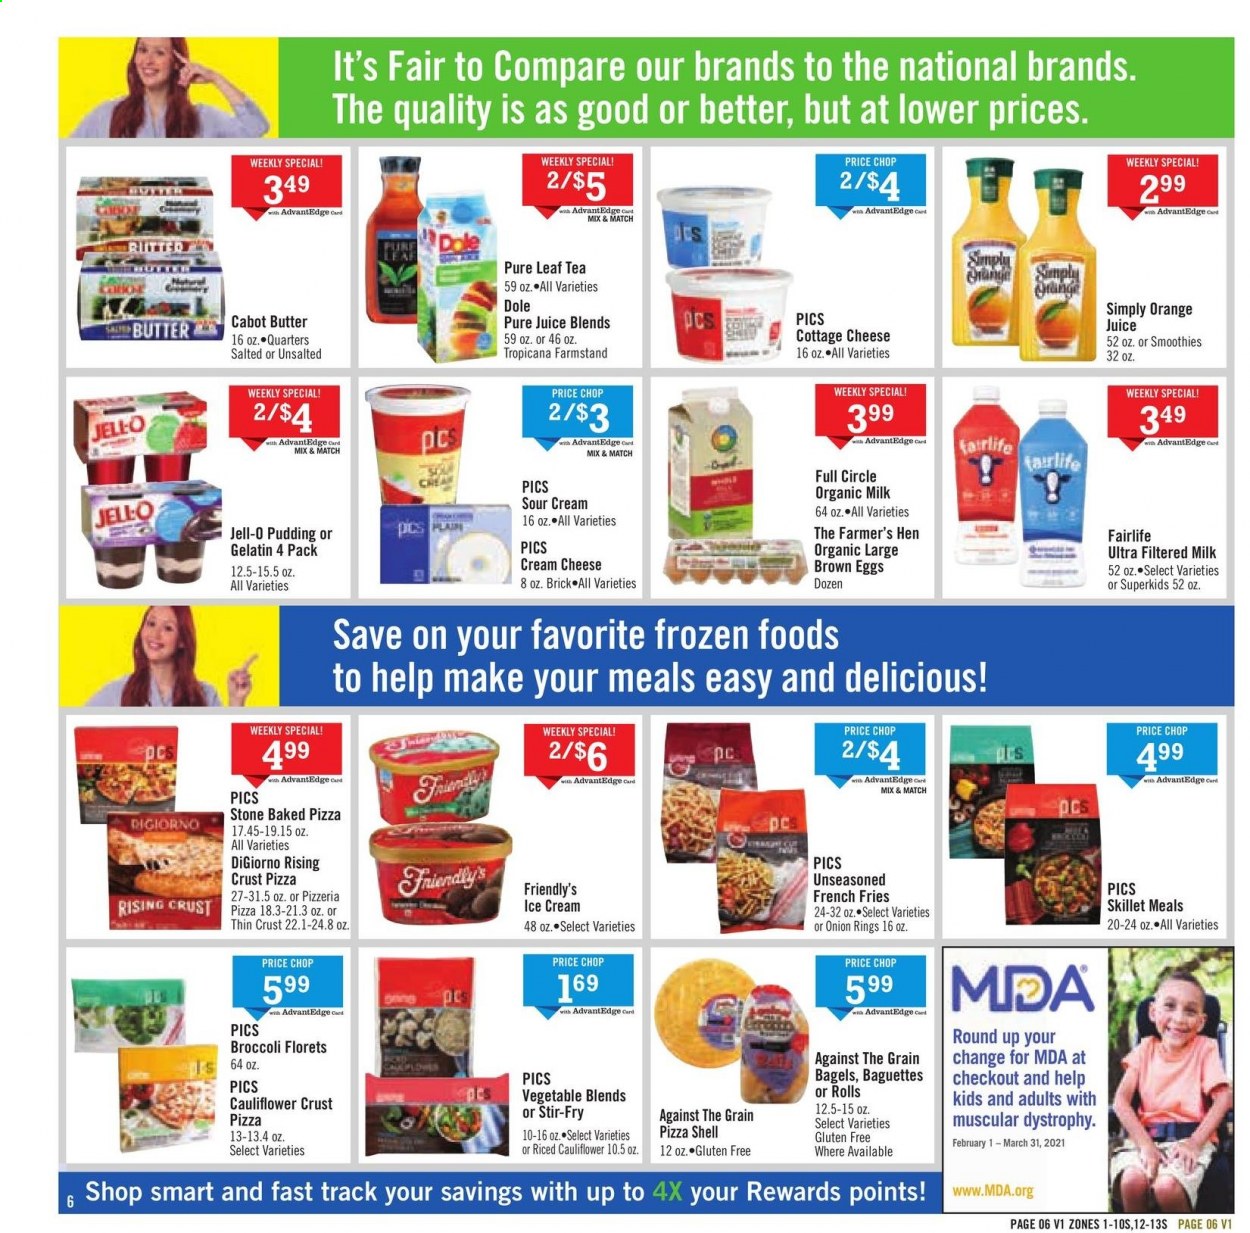 thumbnail - Price Chopper Flyer - 02/28/2021 - 03/06/2021 - Sales products - Dole, baguette, bagels, cream cheese, pizza, onion rings, cottage cheese, cheese, pudding, organic milk, eggs, butter, sour cream, ice cream, Friendly's Ice Cream, cauliflower, potato fries, french fries, Jell-O, orange juice, juice, tea, Pure Leaf, gelatin. Page 6.